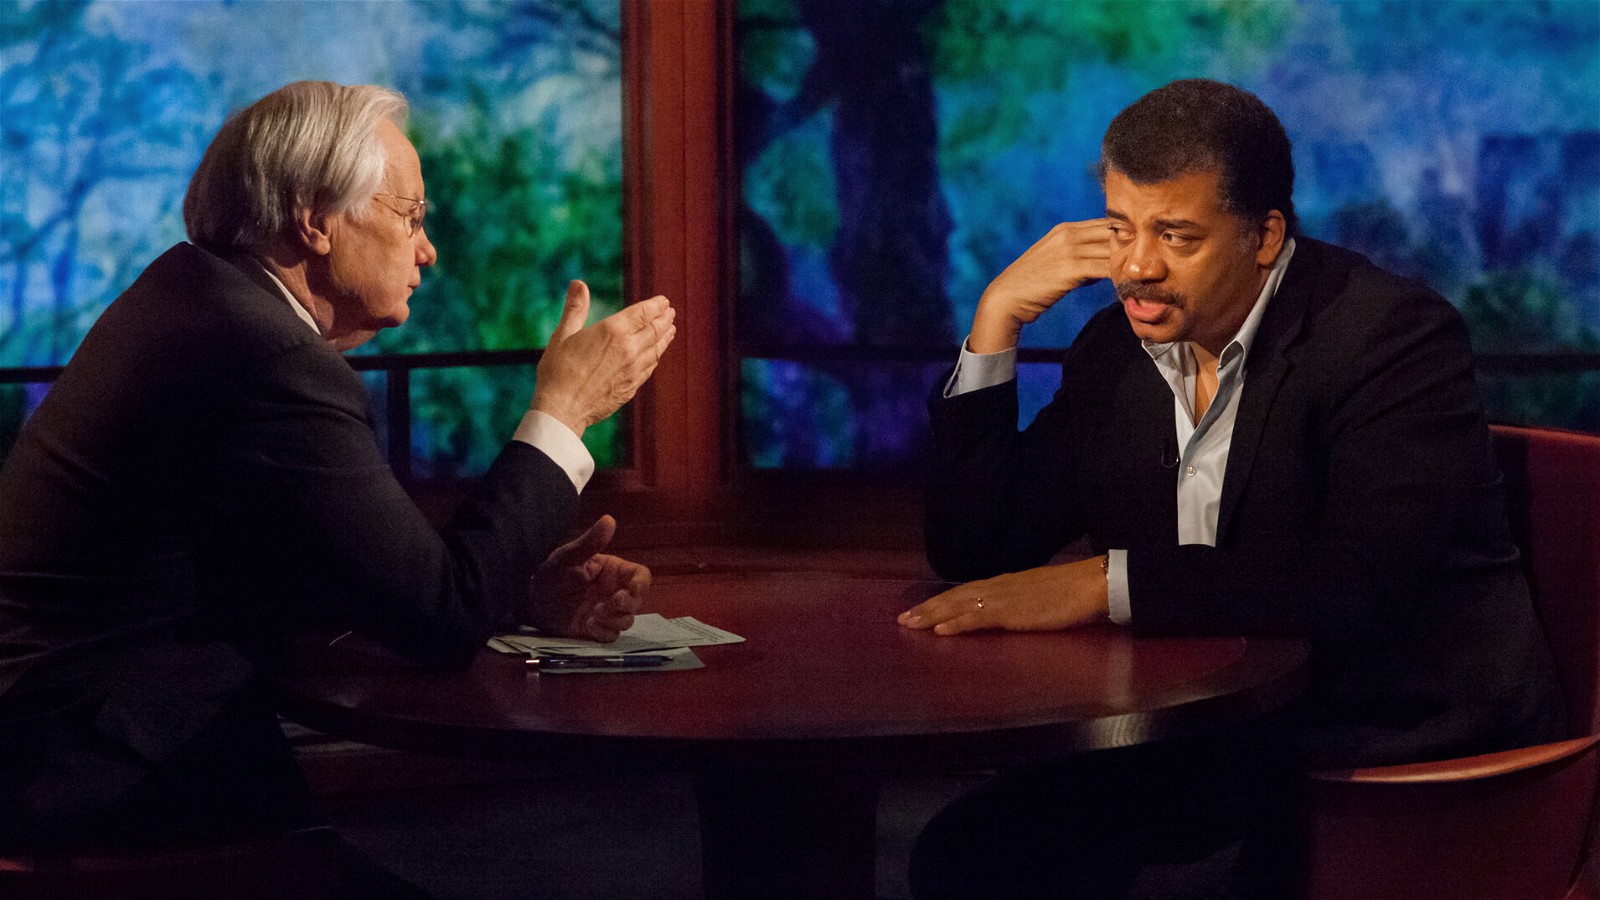 Neil deGrasse Tyson in a conversation with Bill Moyers on the latter's show